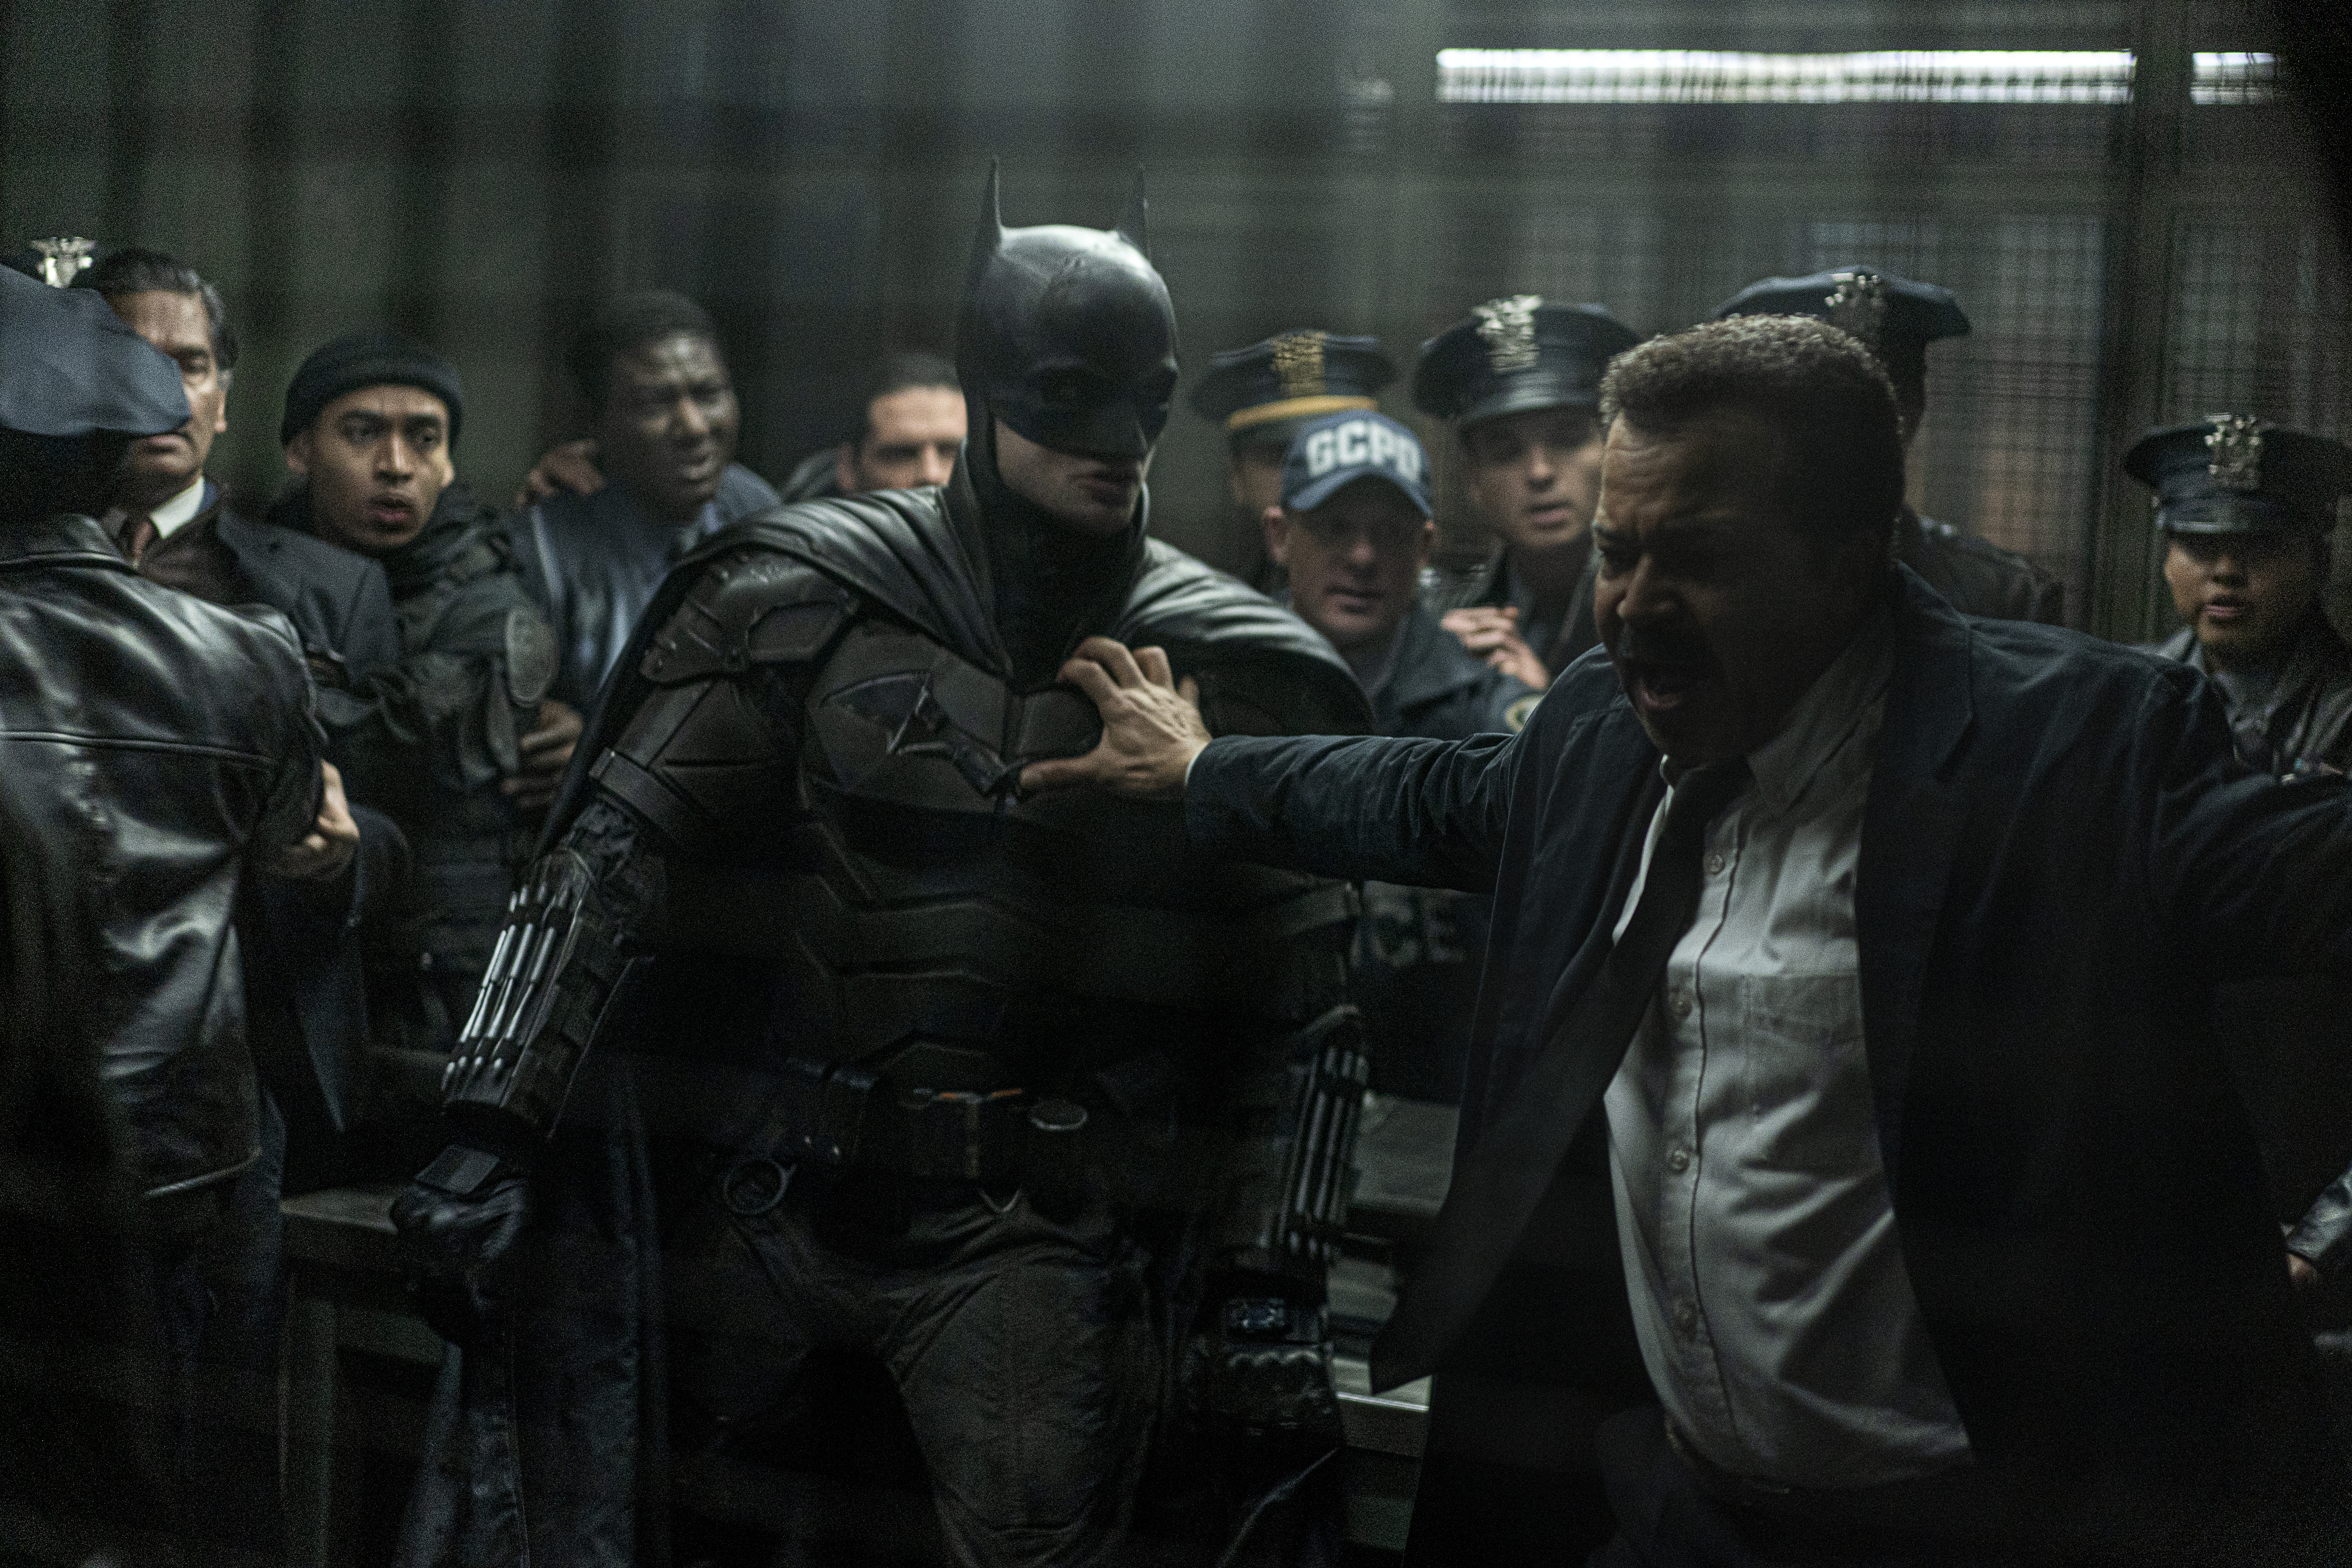 Batman, Jim Gordon, and multiple Gotham cops all about to brawl with one another.